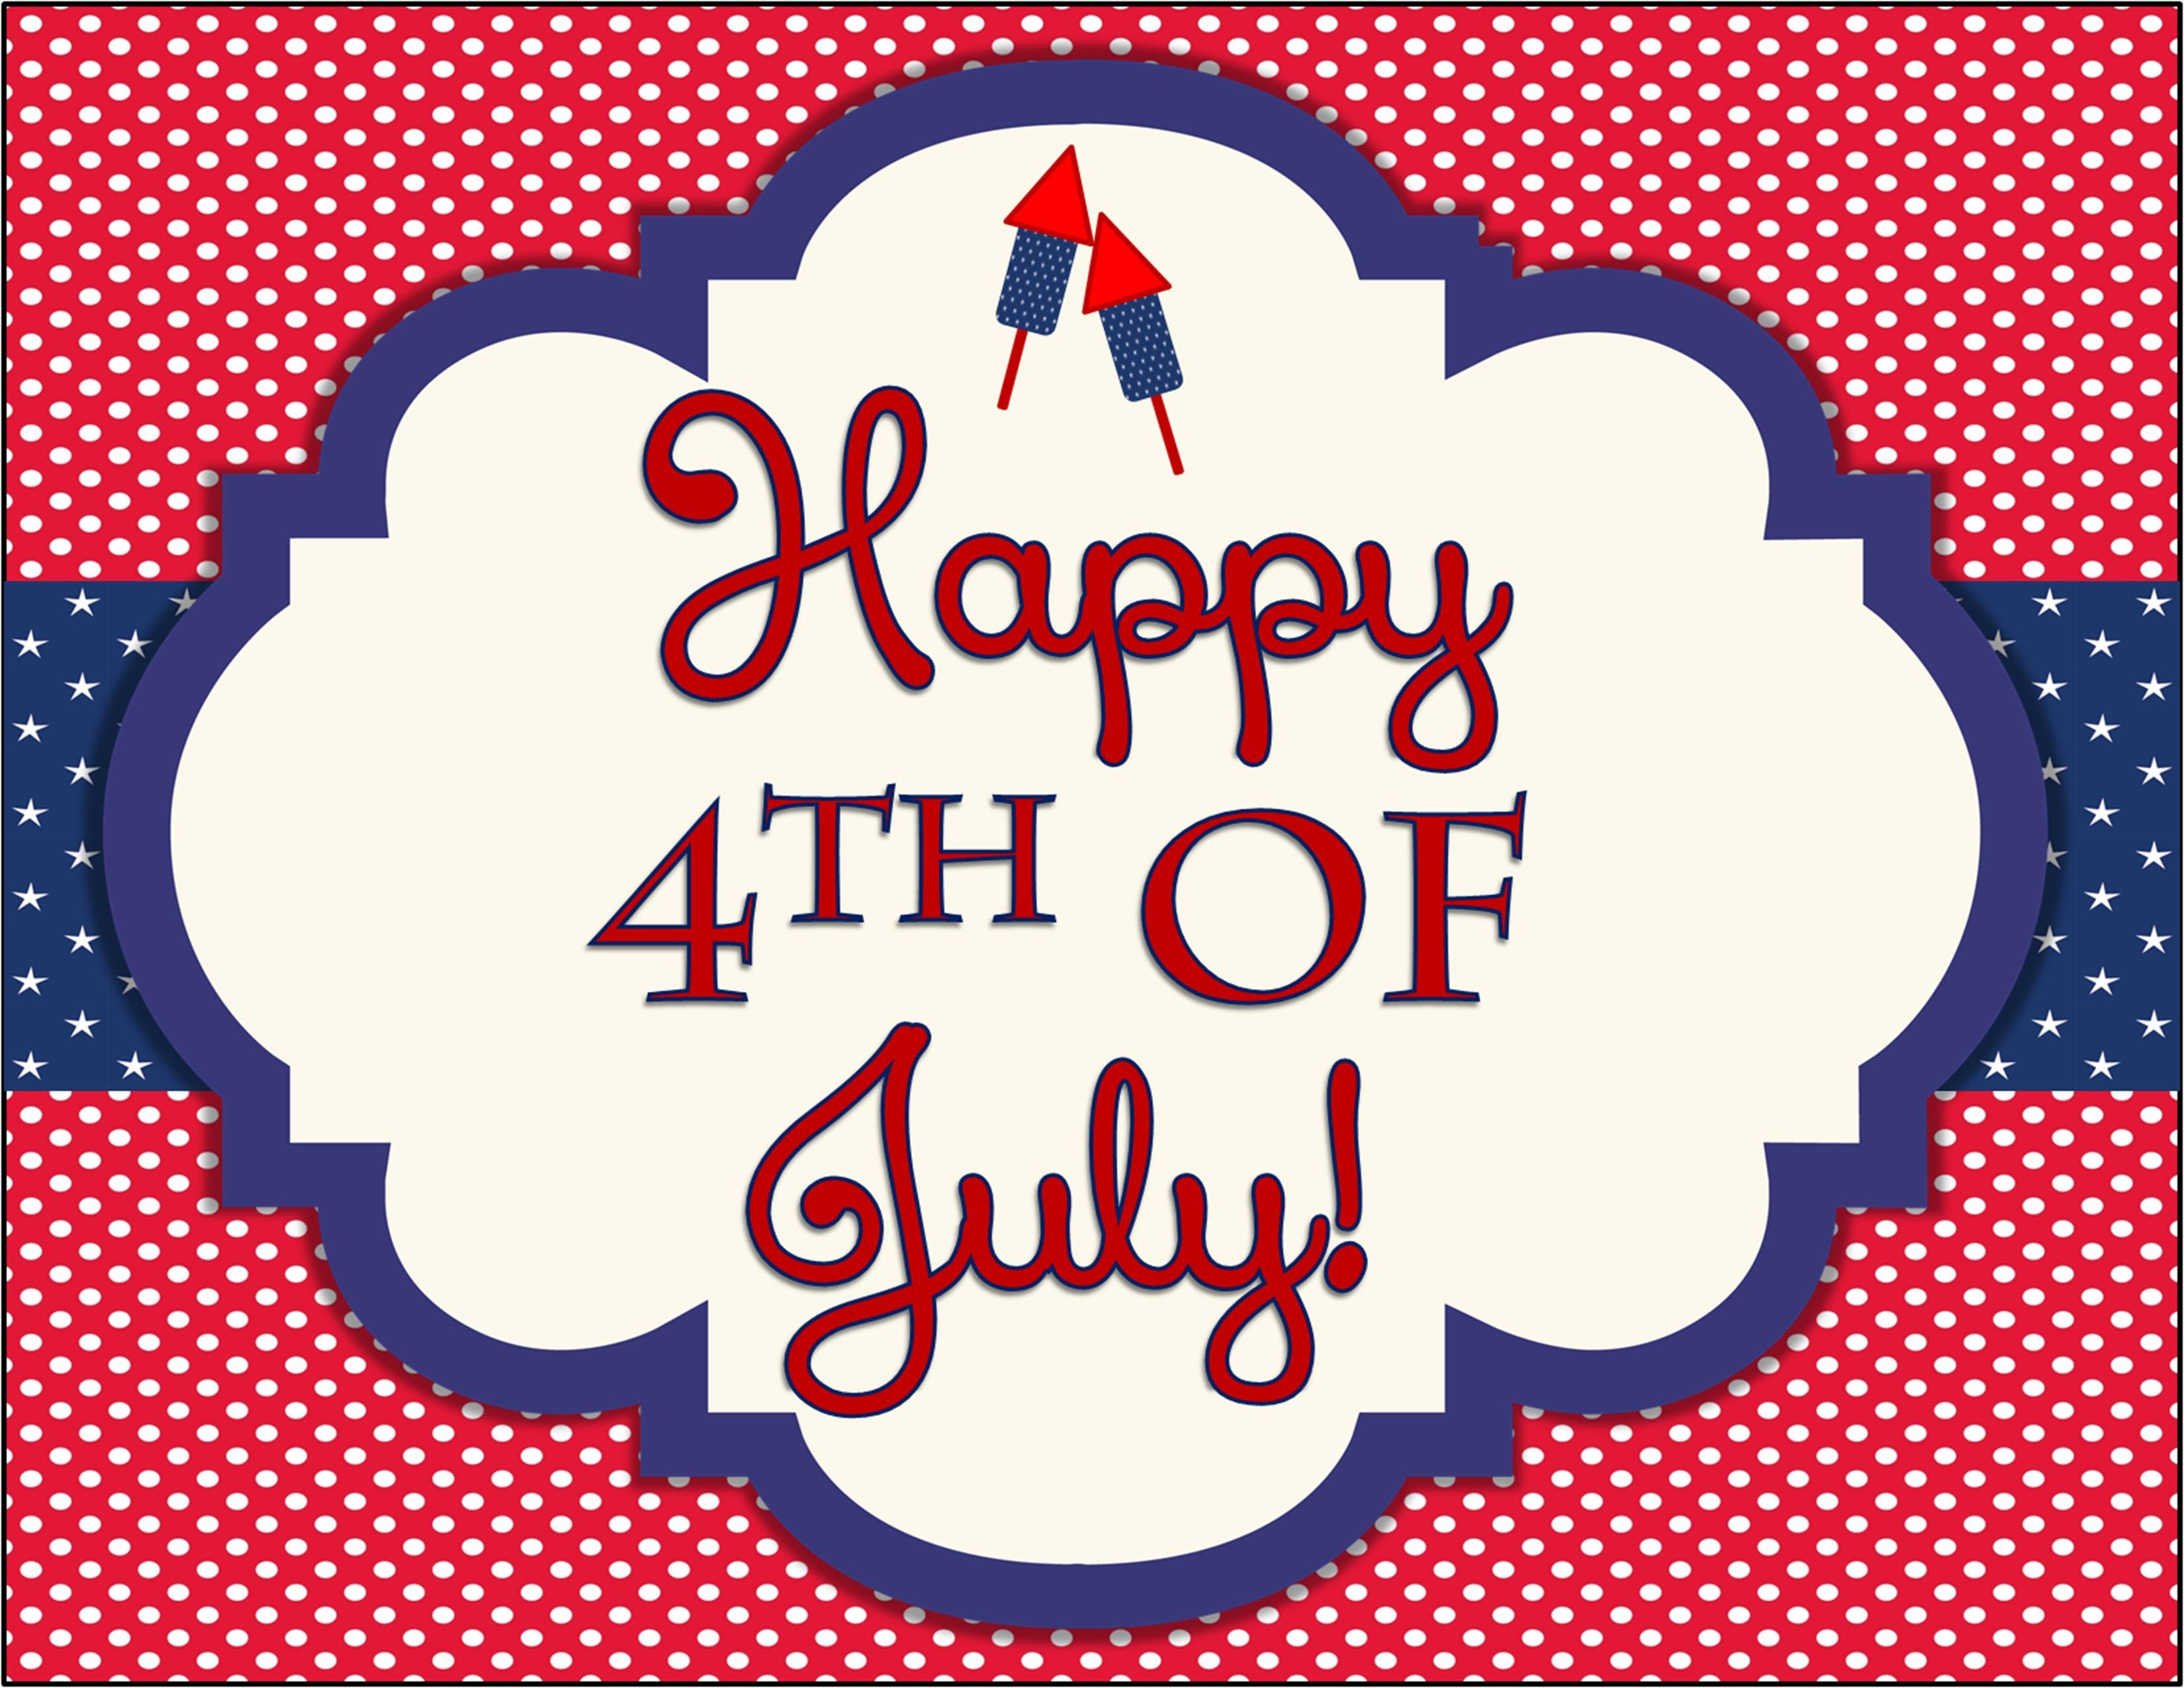 Happy Fourth of July Image 2020. Happy 4th Of July 2020